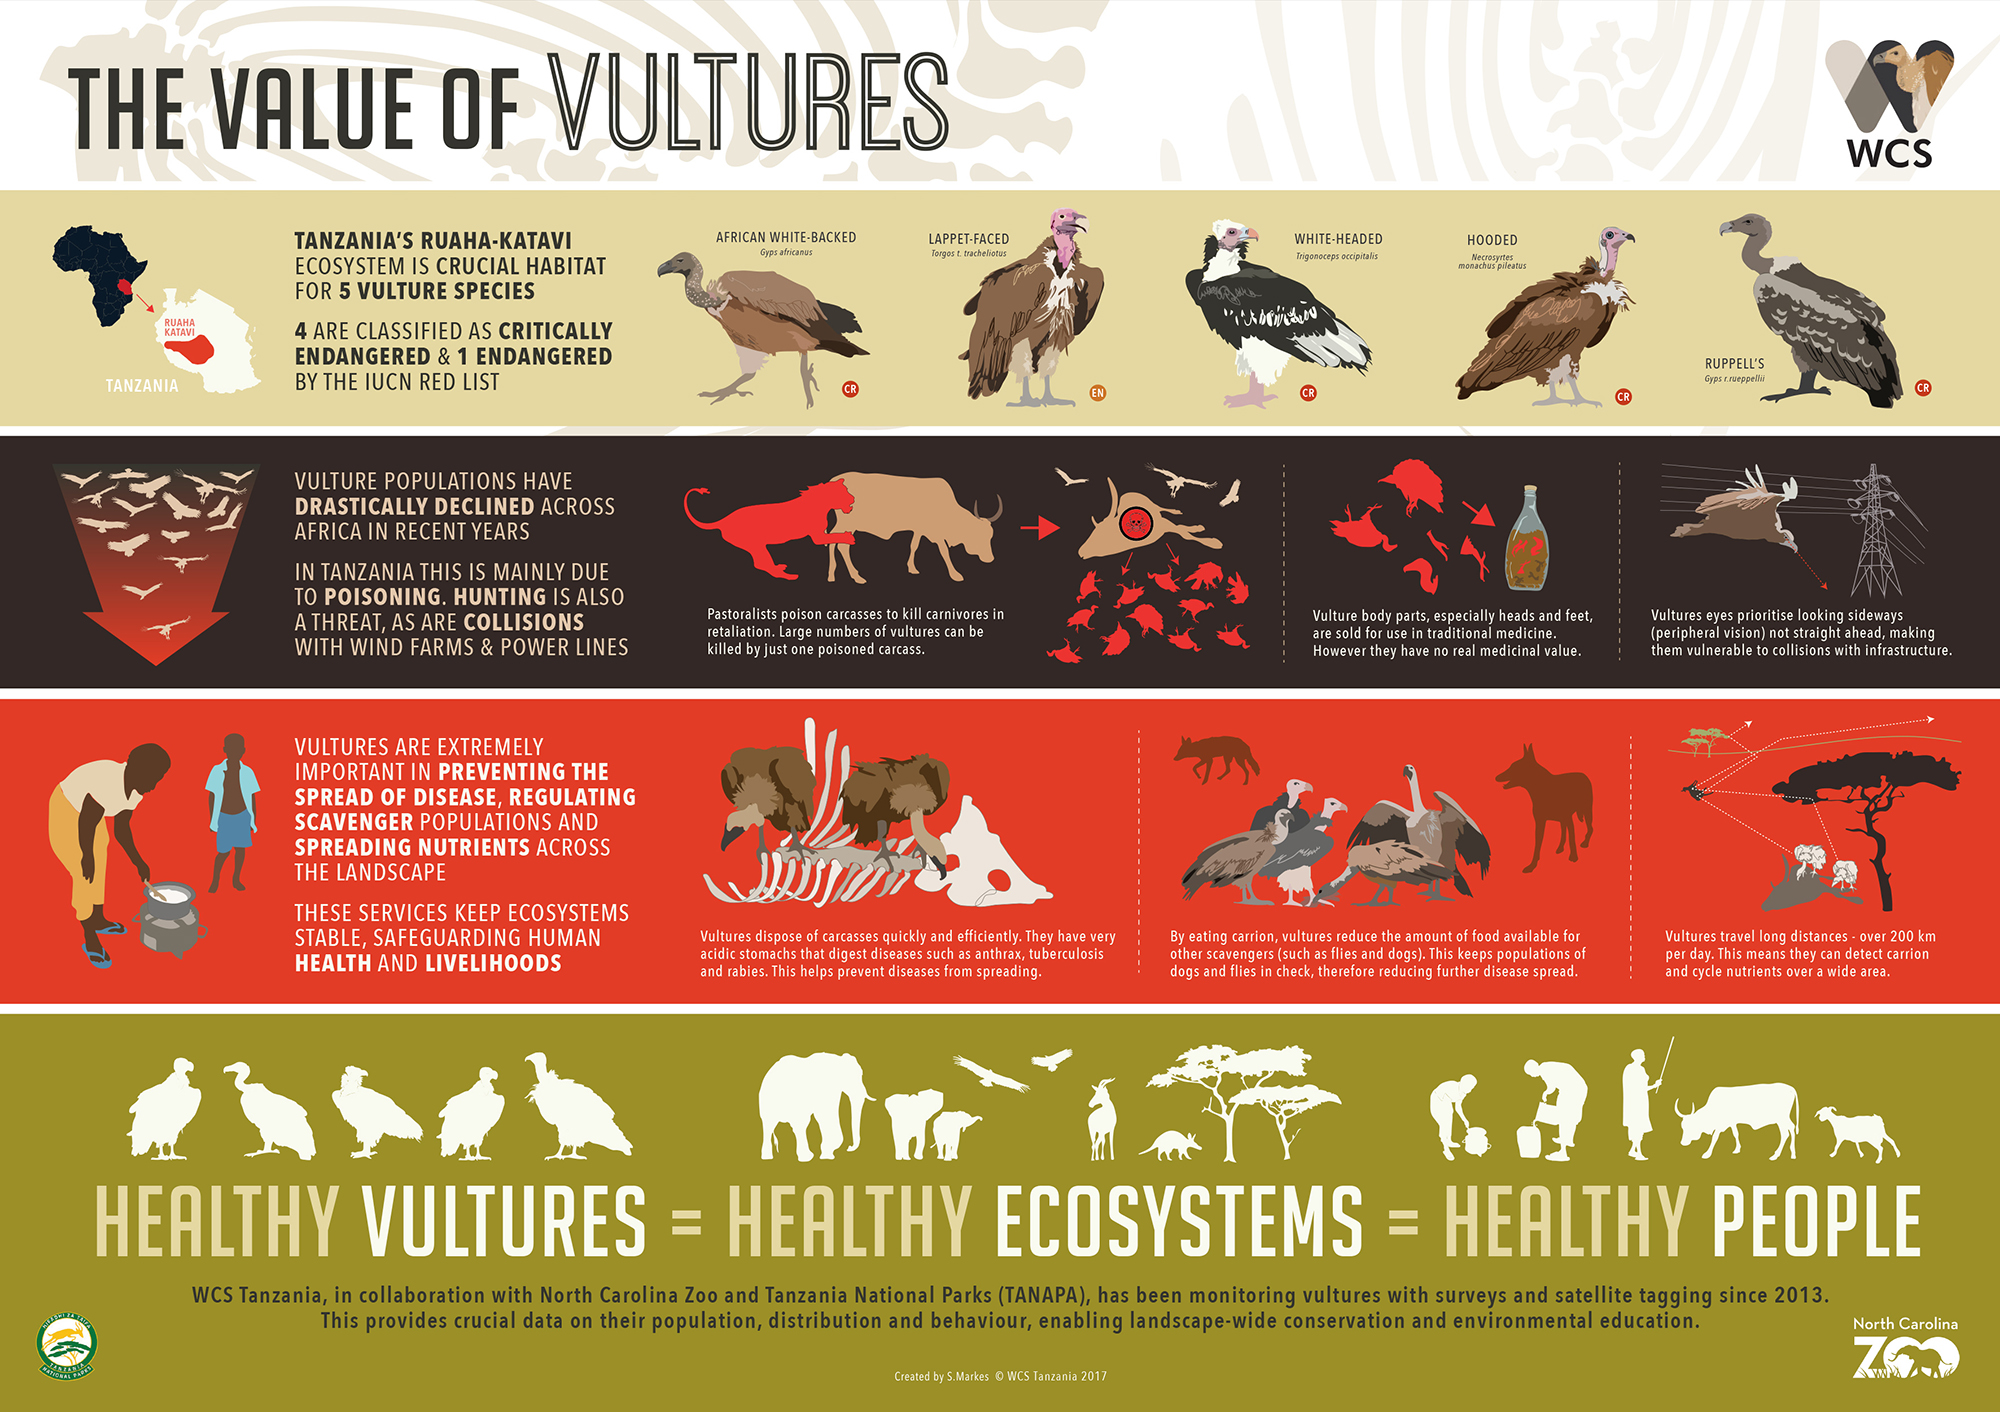 The Value of Vultures | Wild View